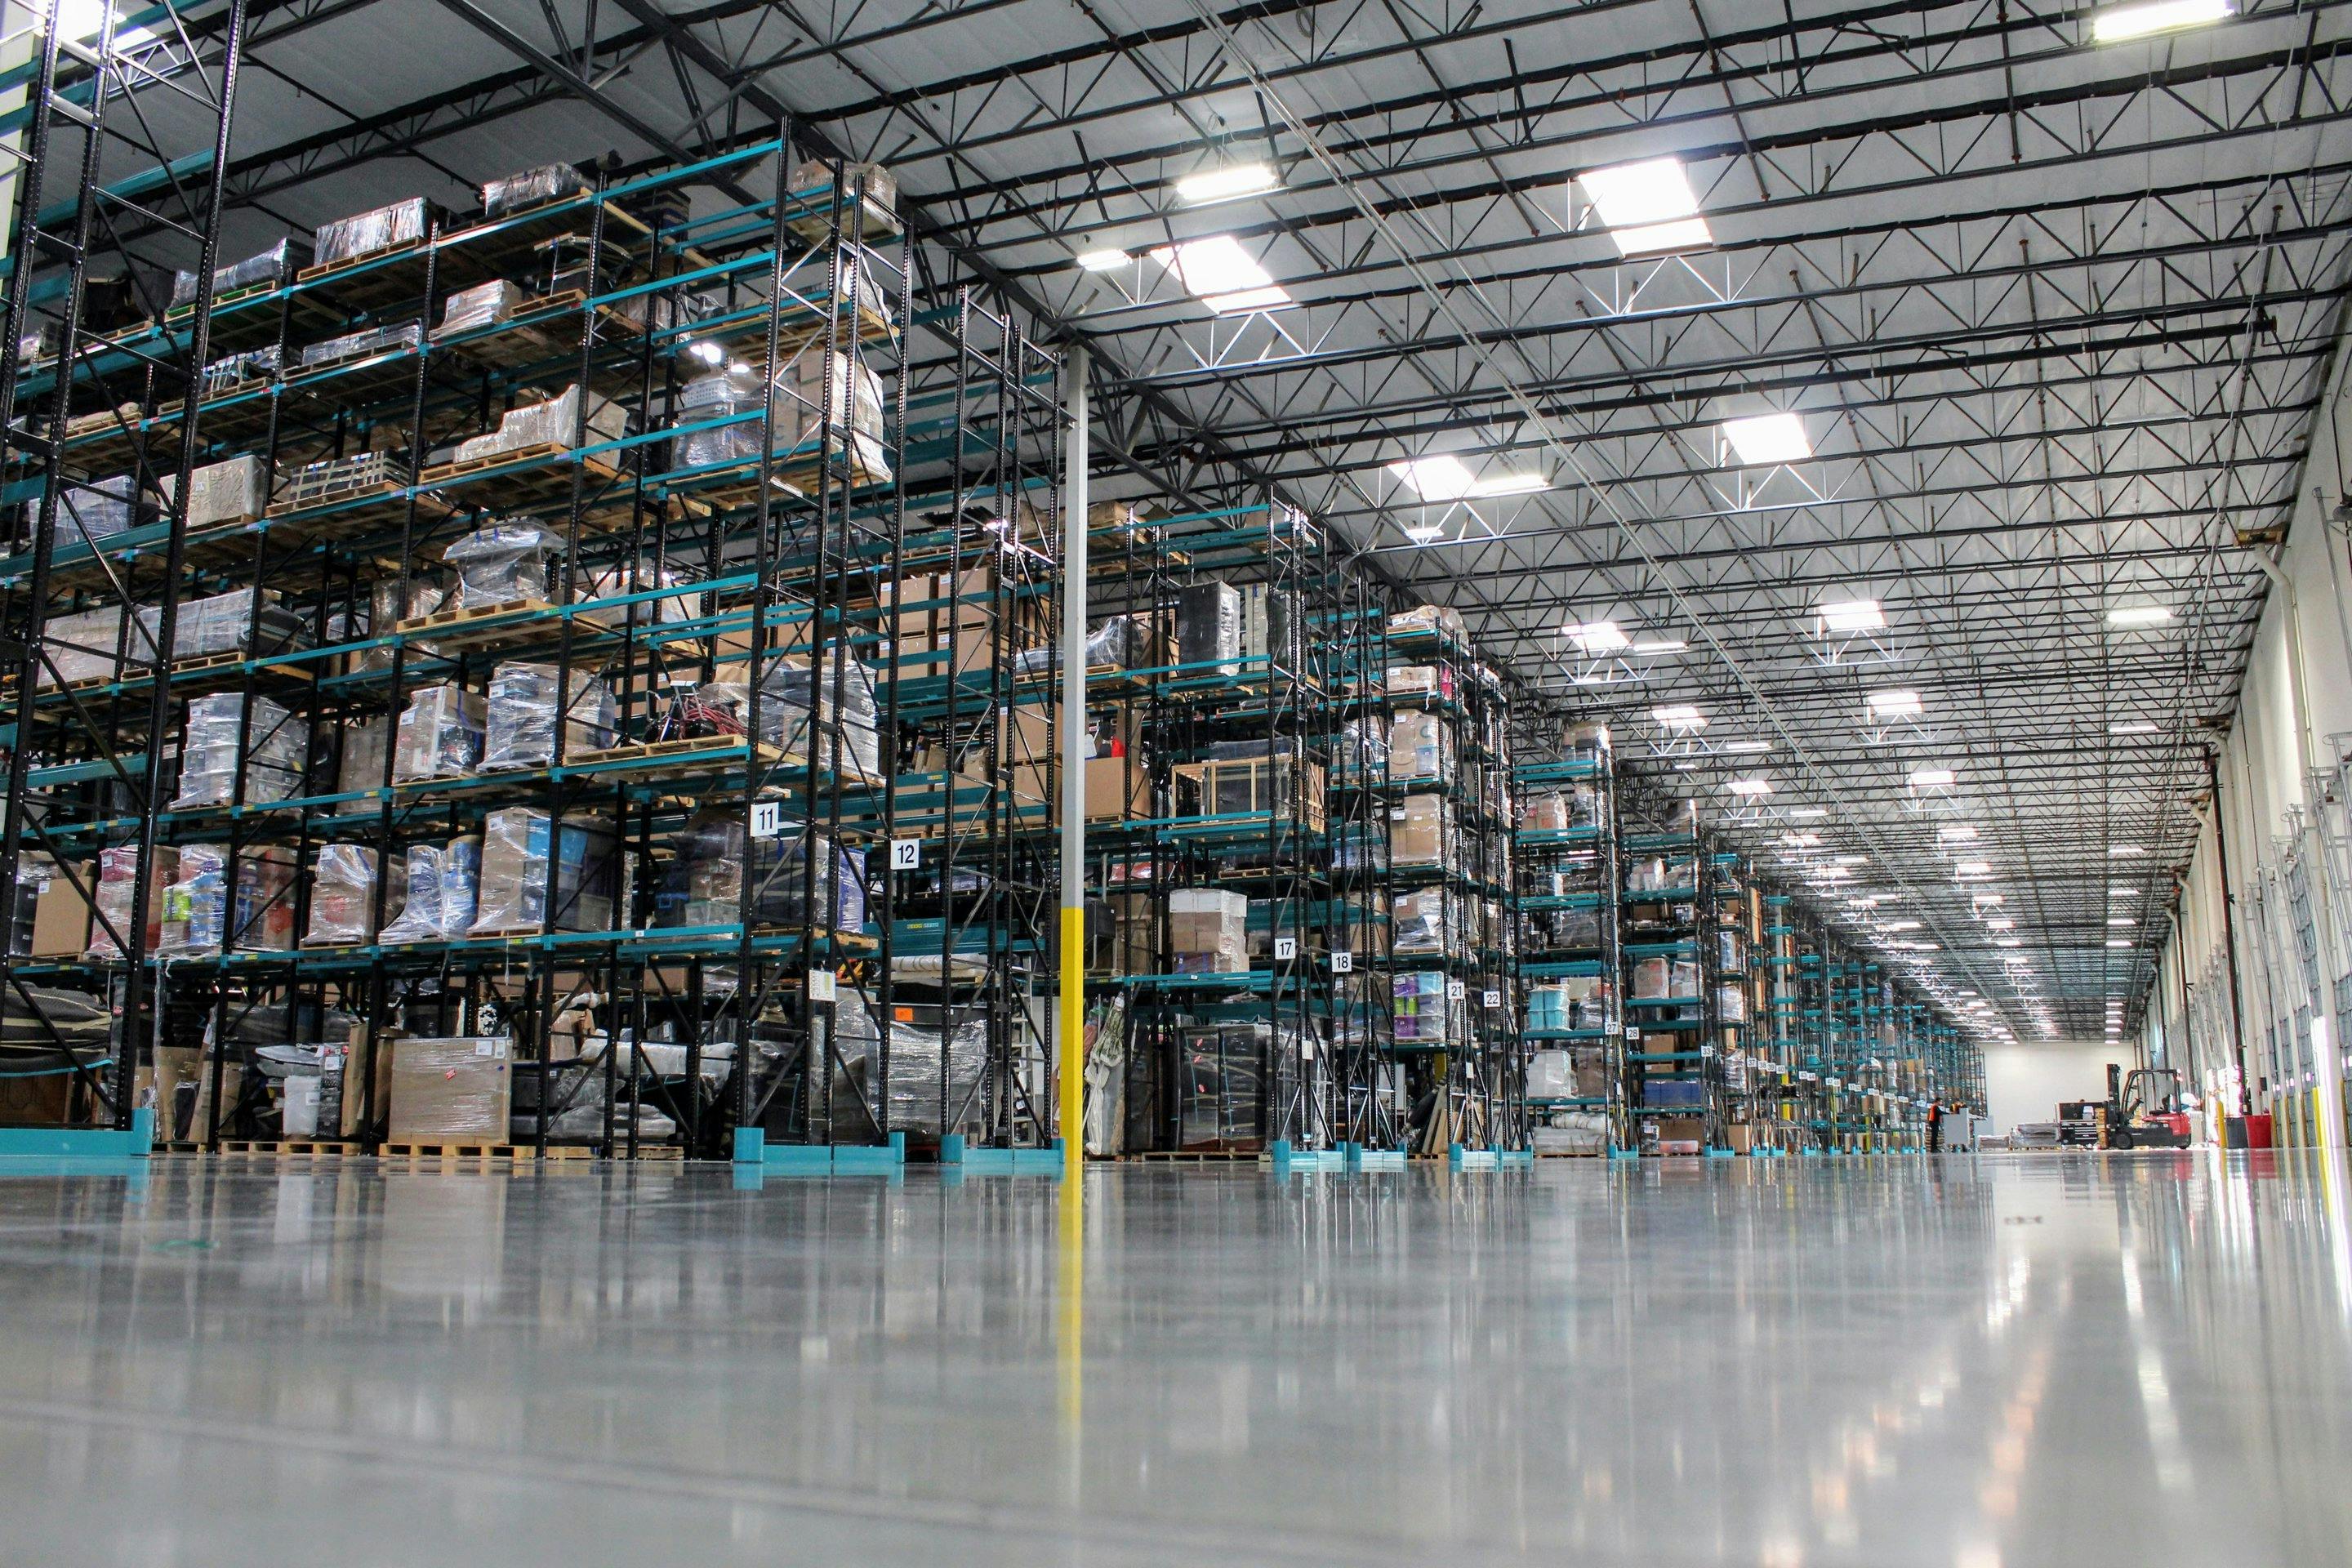 Clutter's pristine warehouse, with large teal racks filled with neatly organized belongings